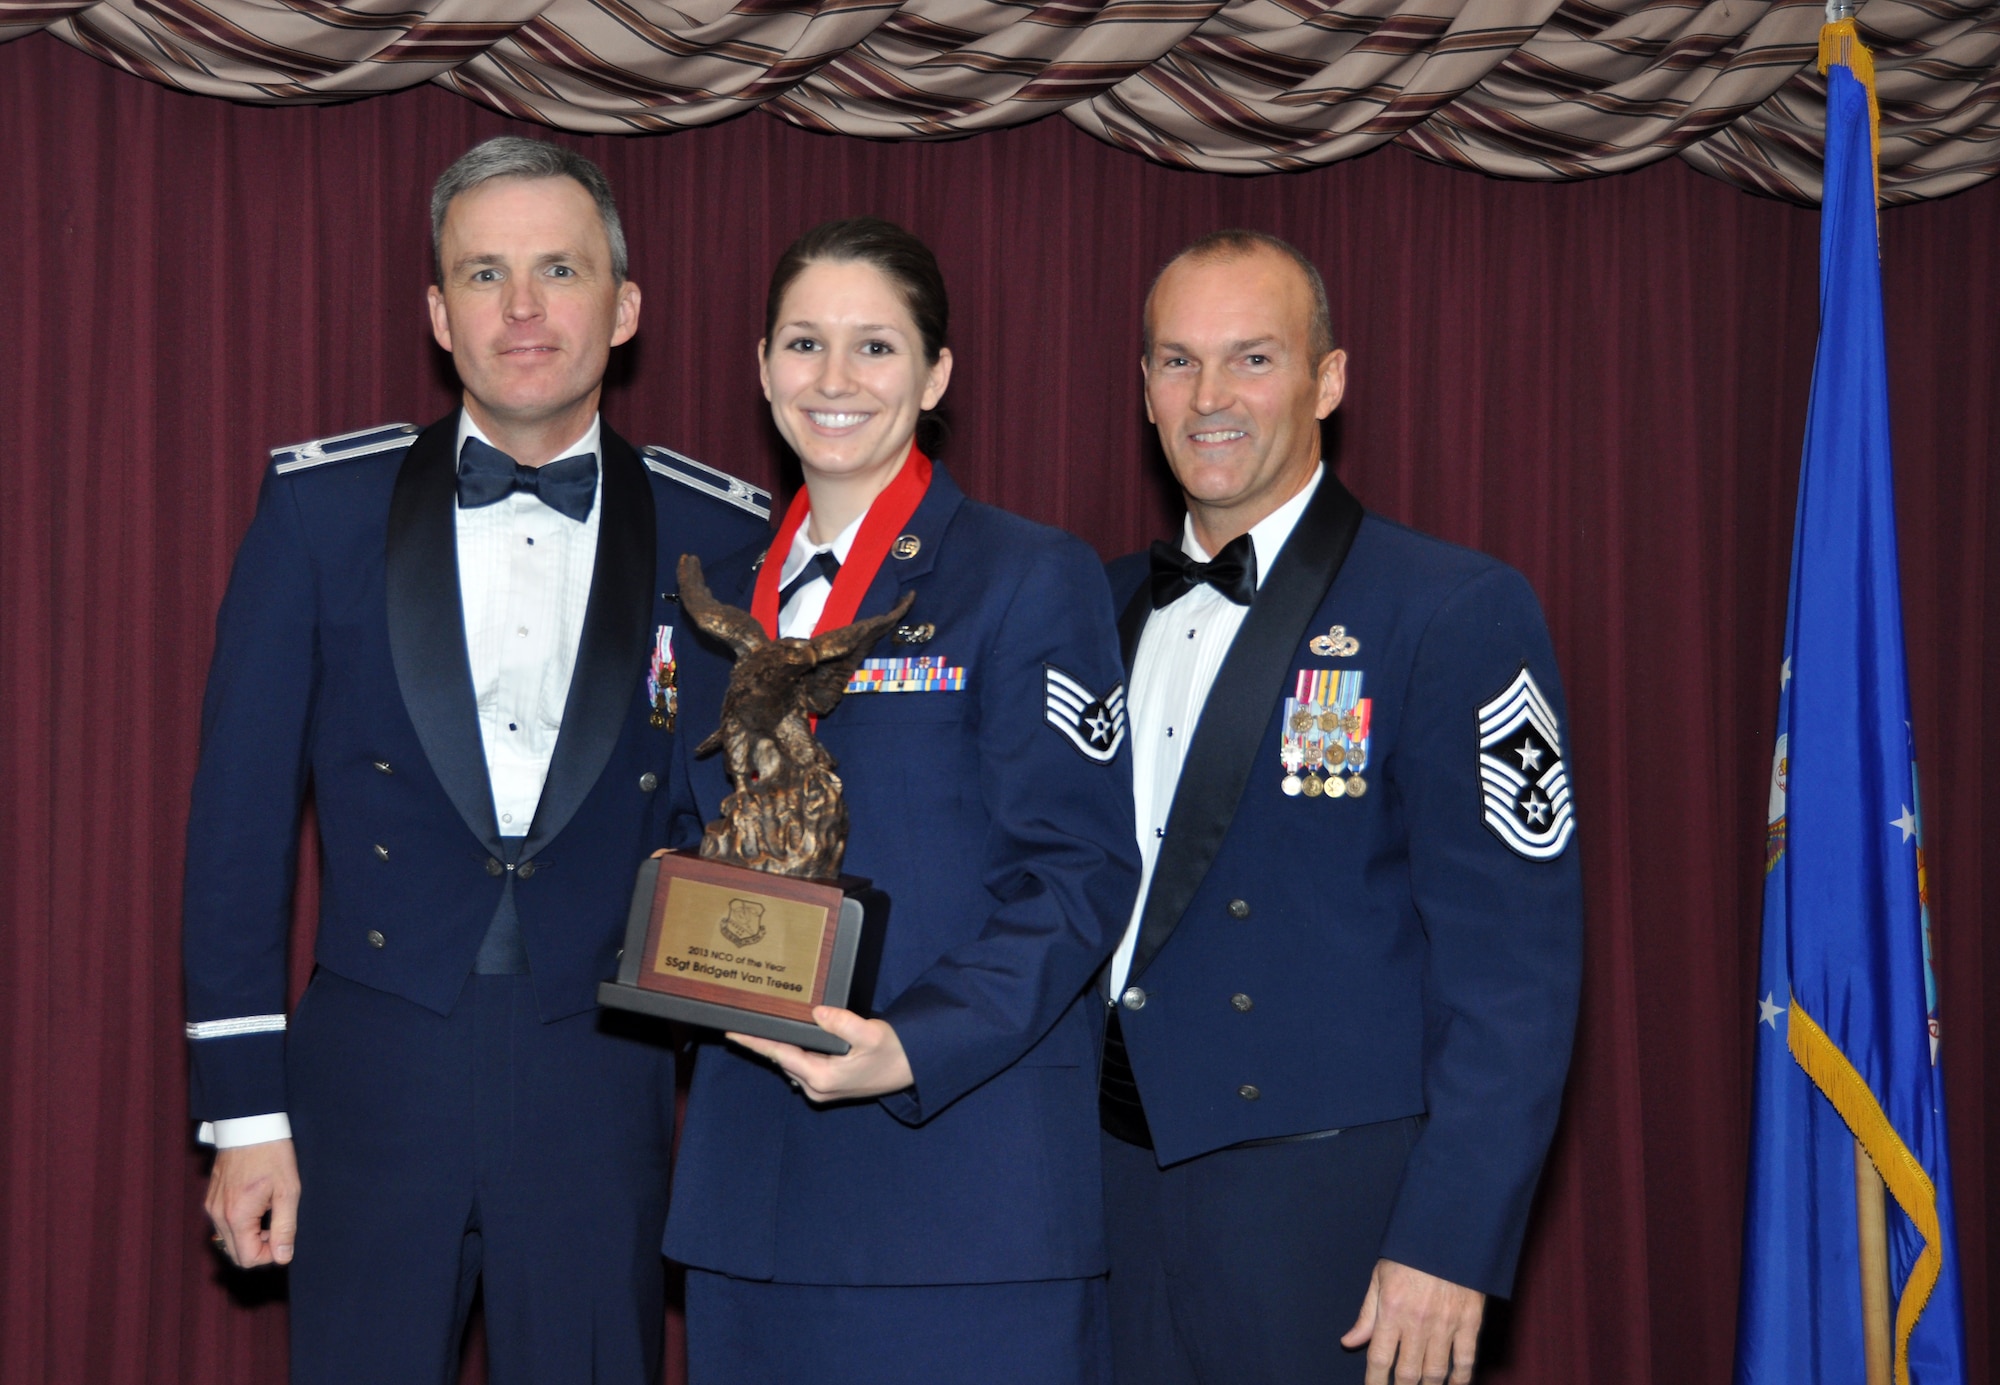 Staff Sgt. Bridget Van Treese receives the Non-Commissioned Officer of the Year Award from 507th Air Refueling Wing acting Commander, Col. Kevin Trayer, left and 507th ARW Command Chief, Chief Master Sgt. Steven Brown during the annual awards banquet at the Tinker club Nov. 23, 2013.  (U.S. Air Force photo/Senior Airman Mark Hybers)